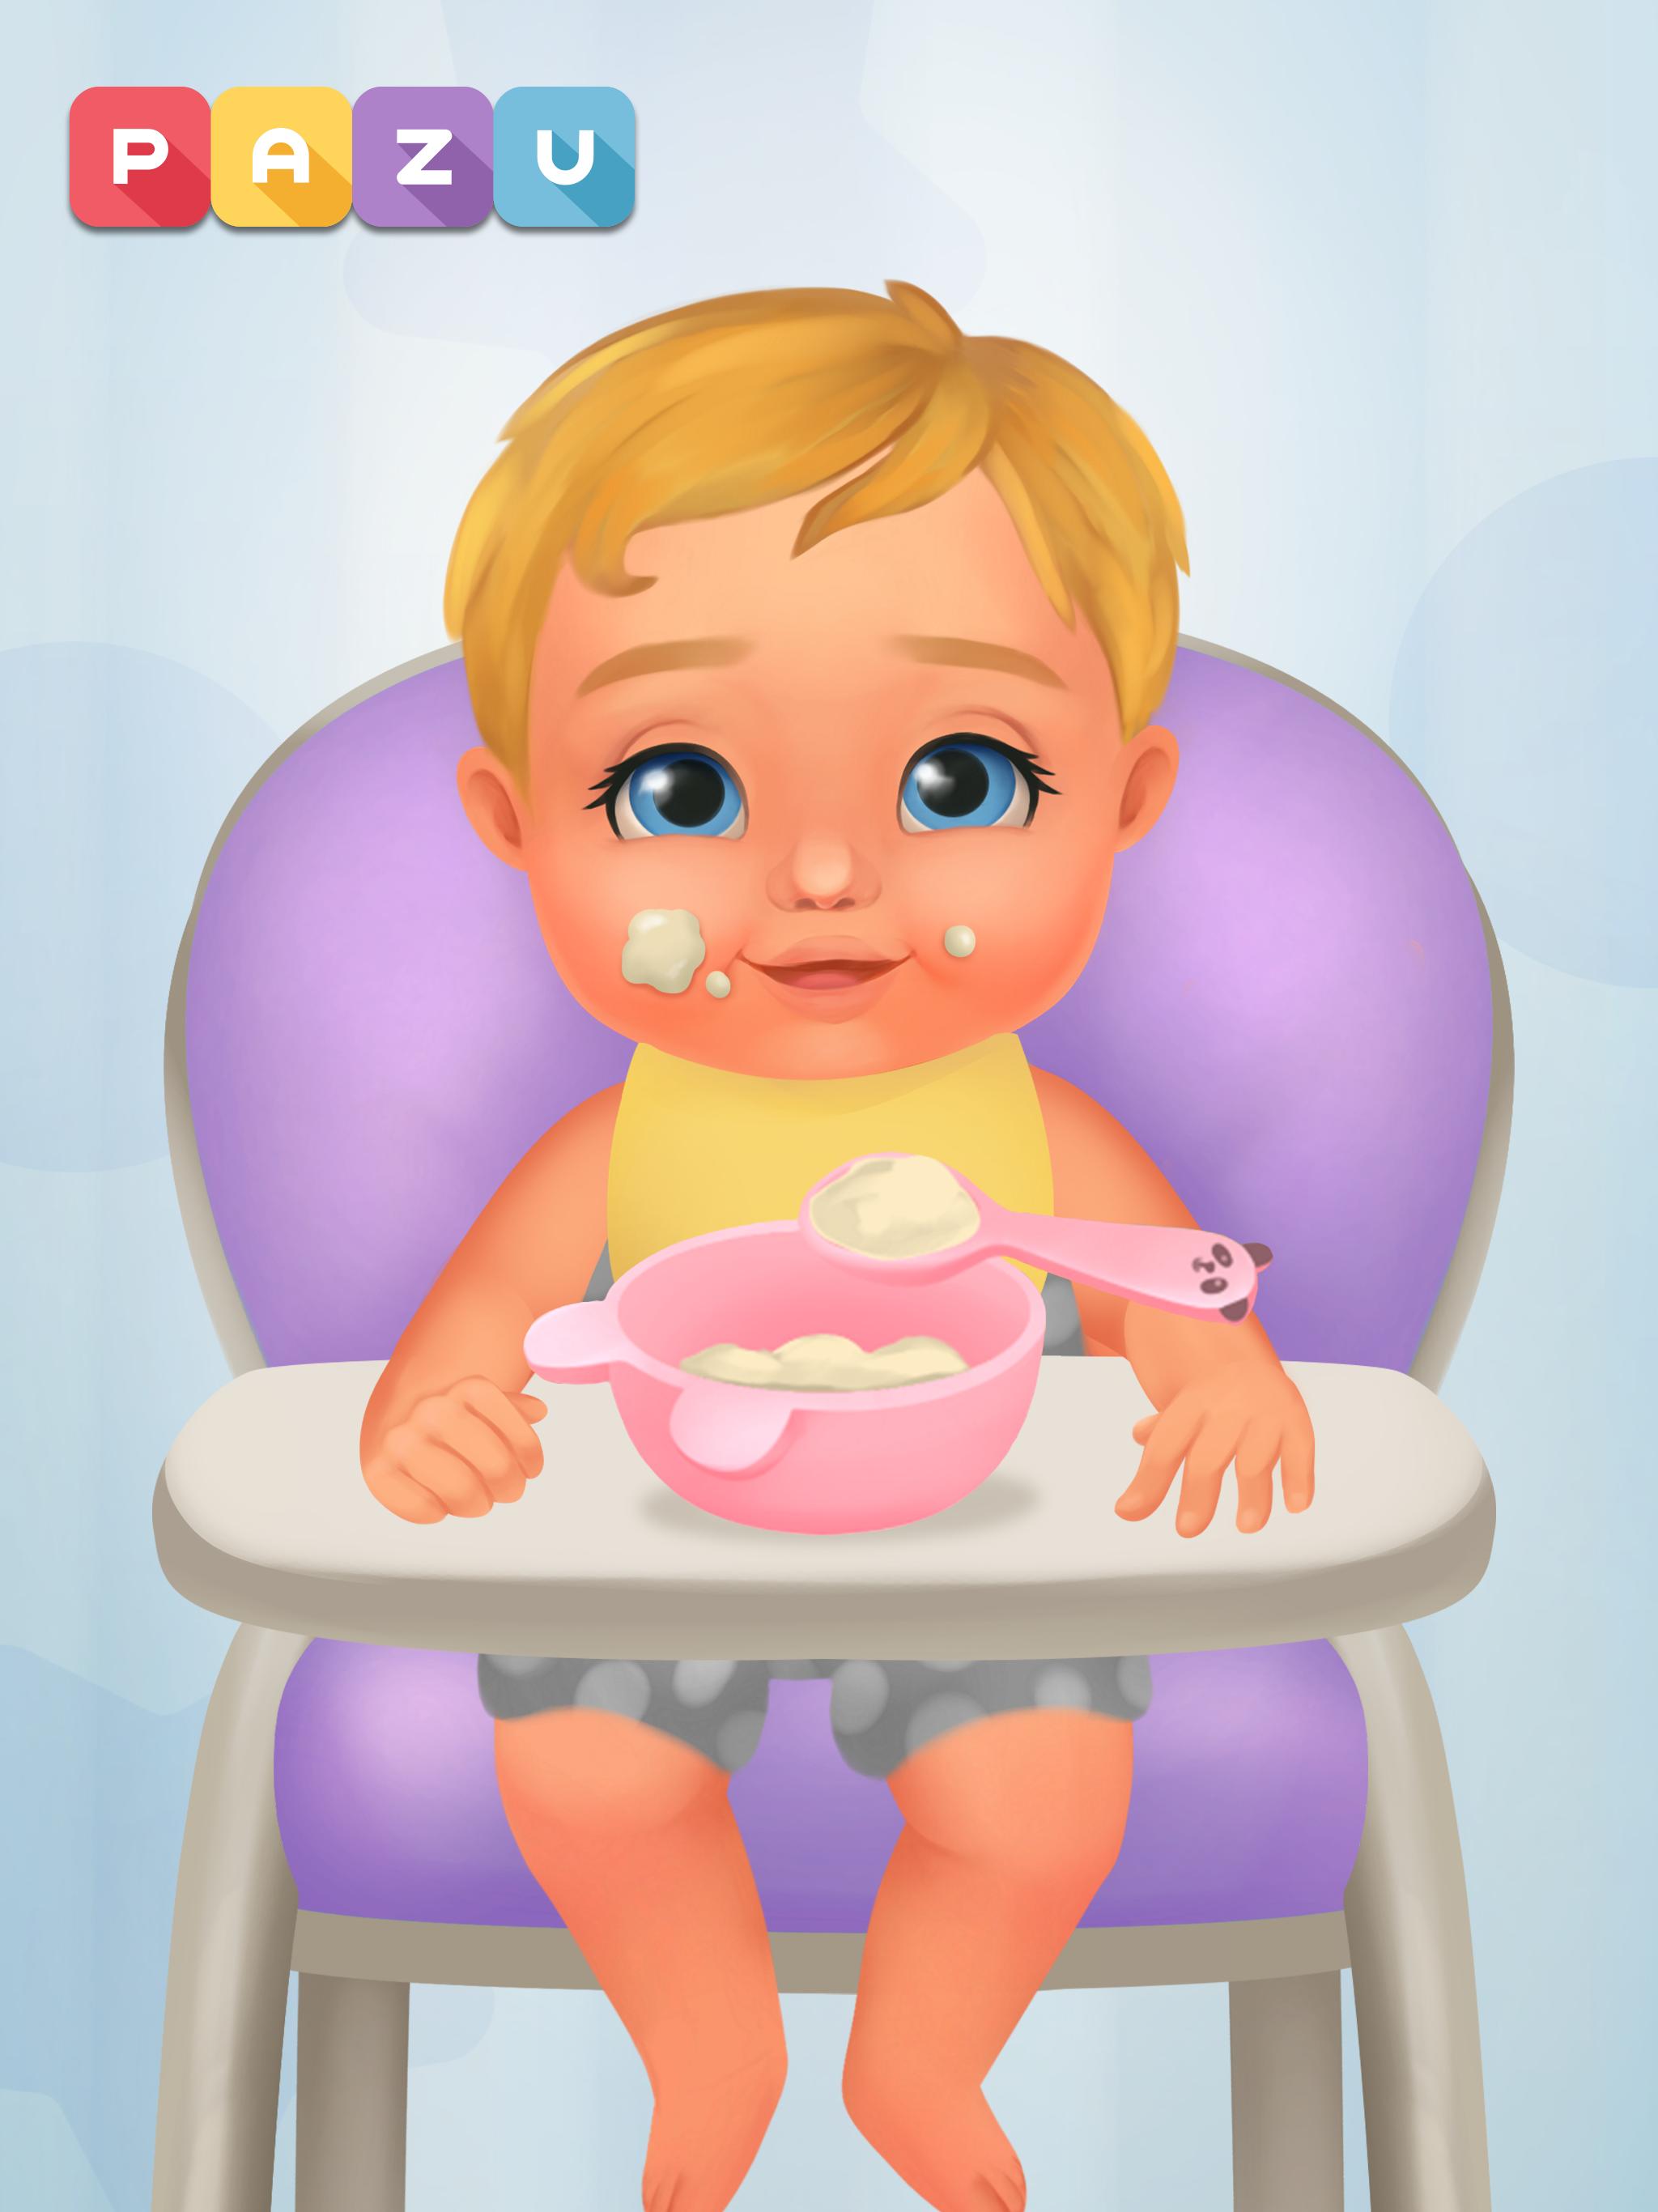 Chic Baby 2 Dress up & baby care games for kids 1.02 Screenshot 13